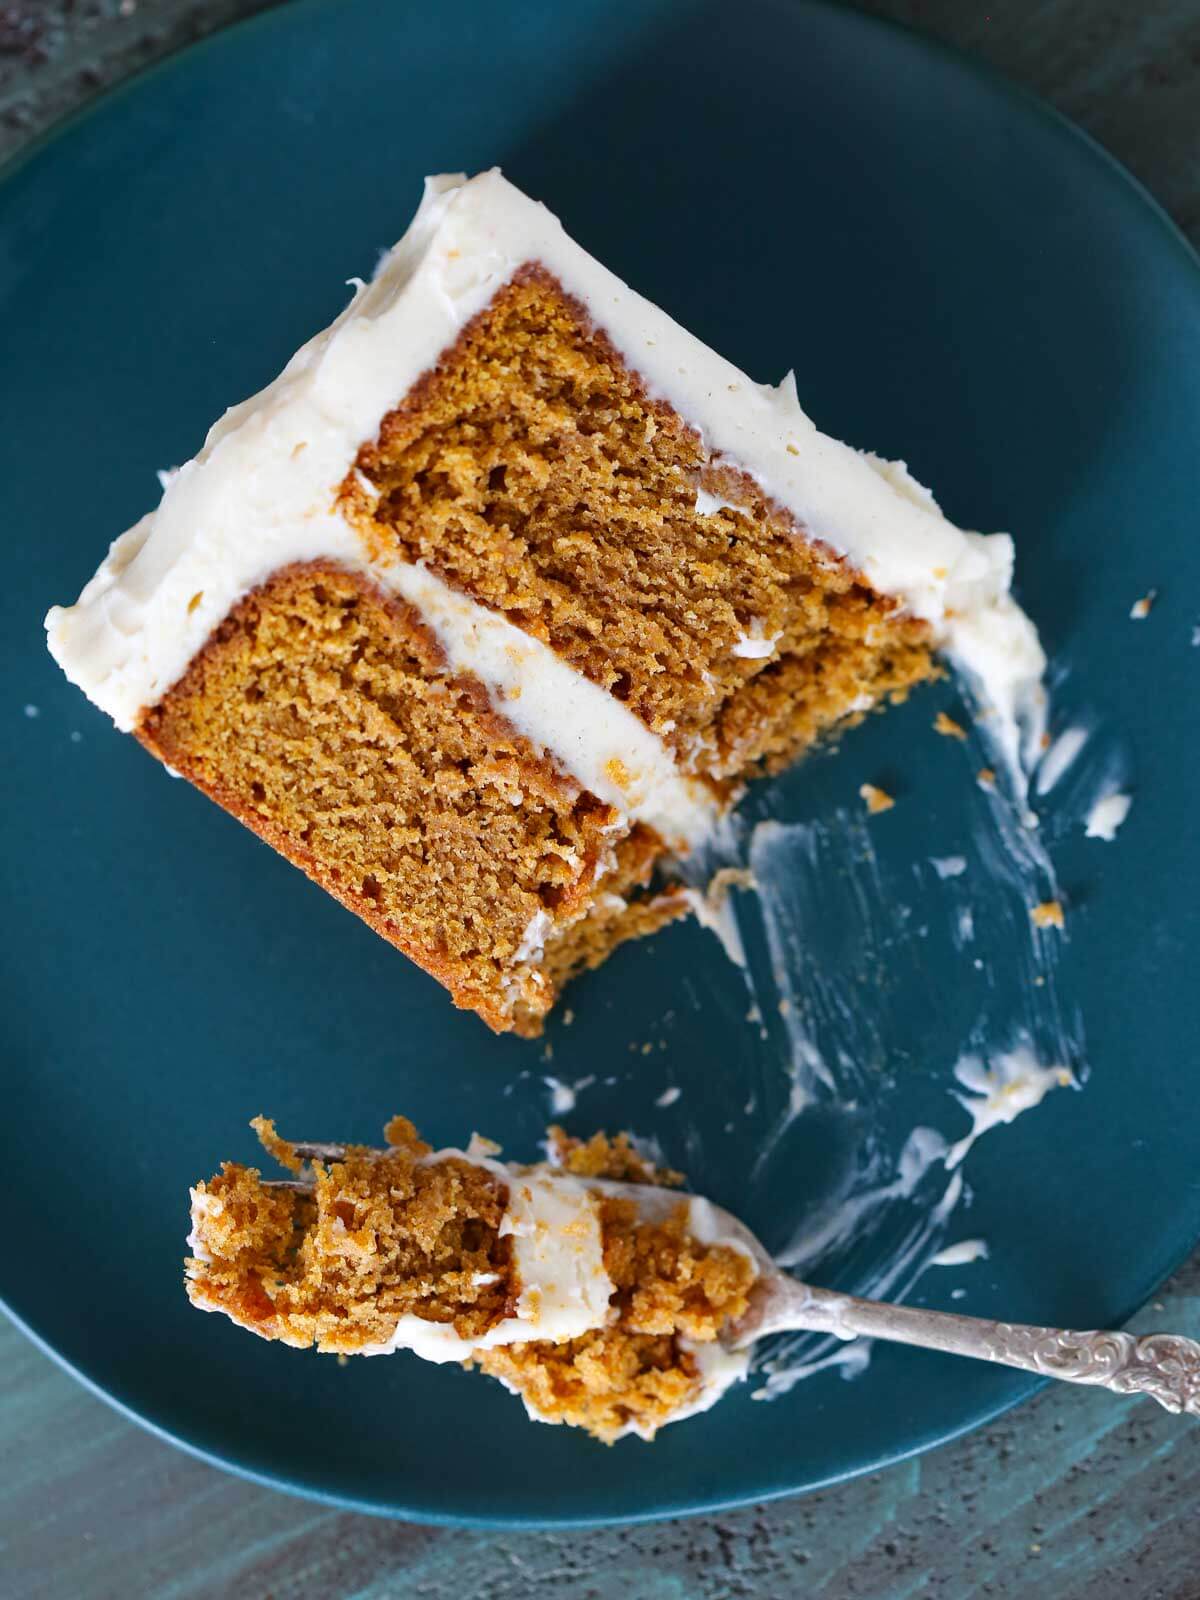 A fork filled with pumpkin cake from a plated slice.